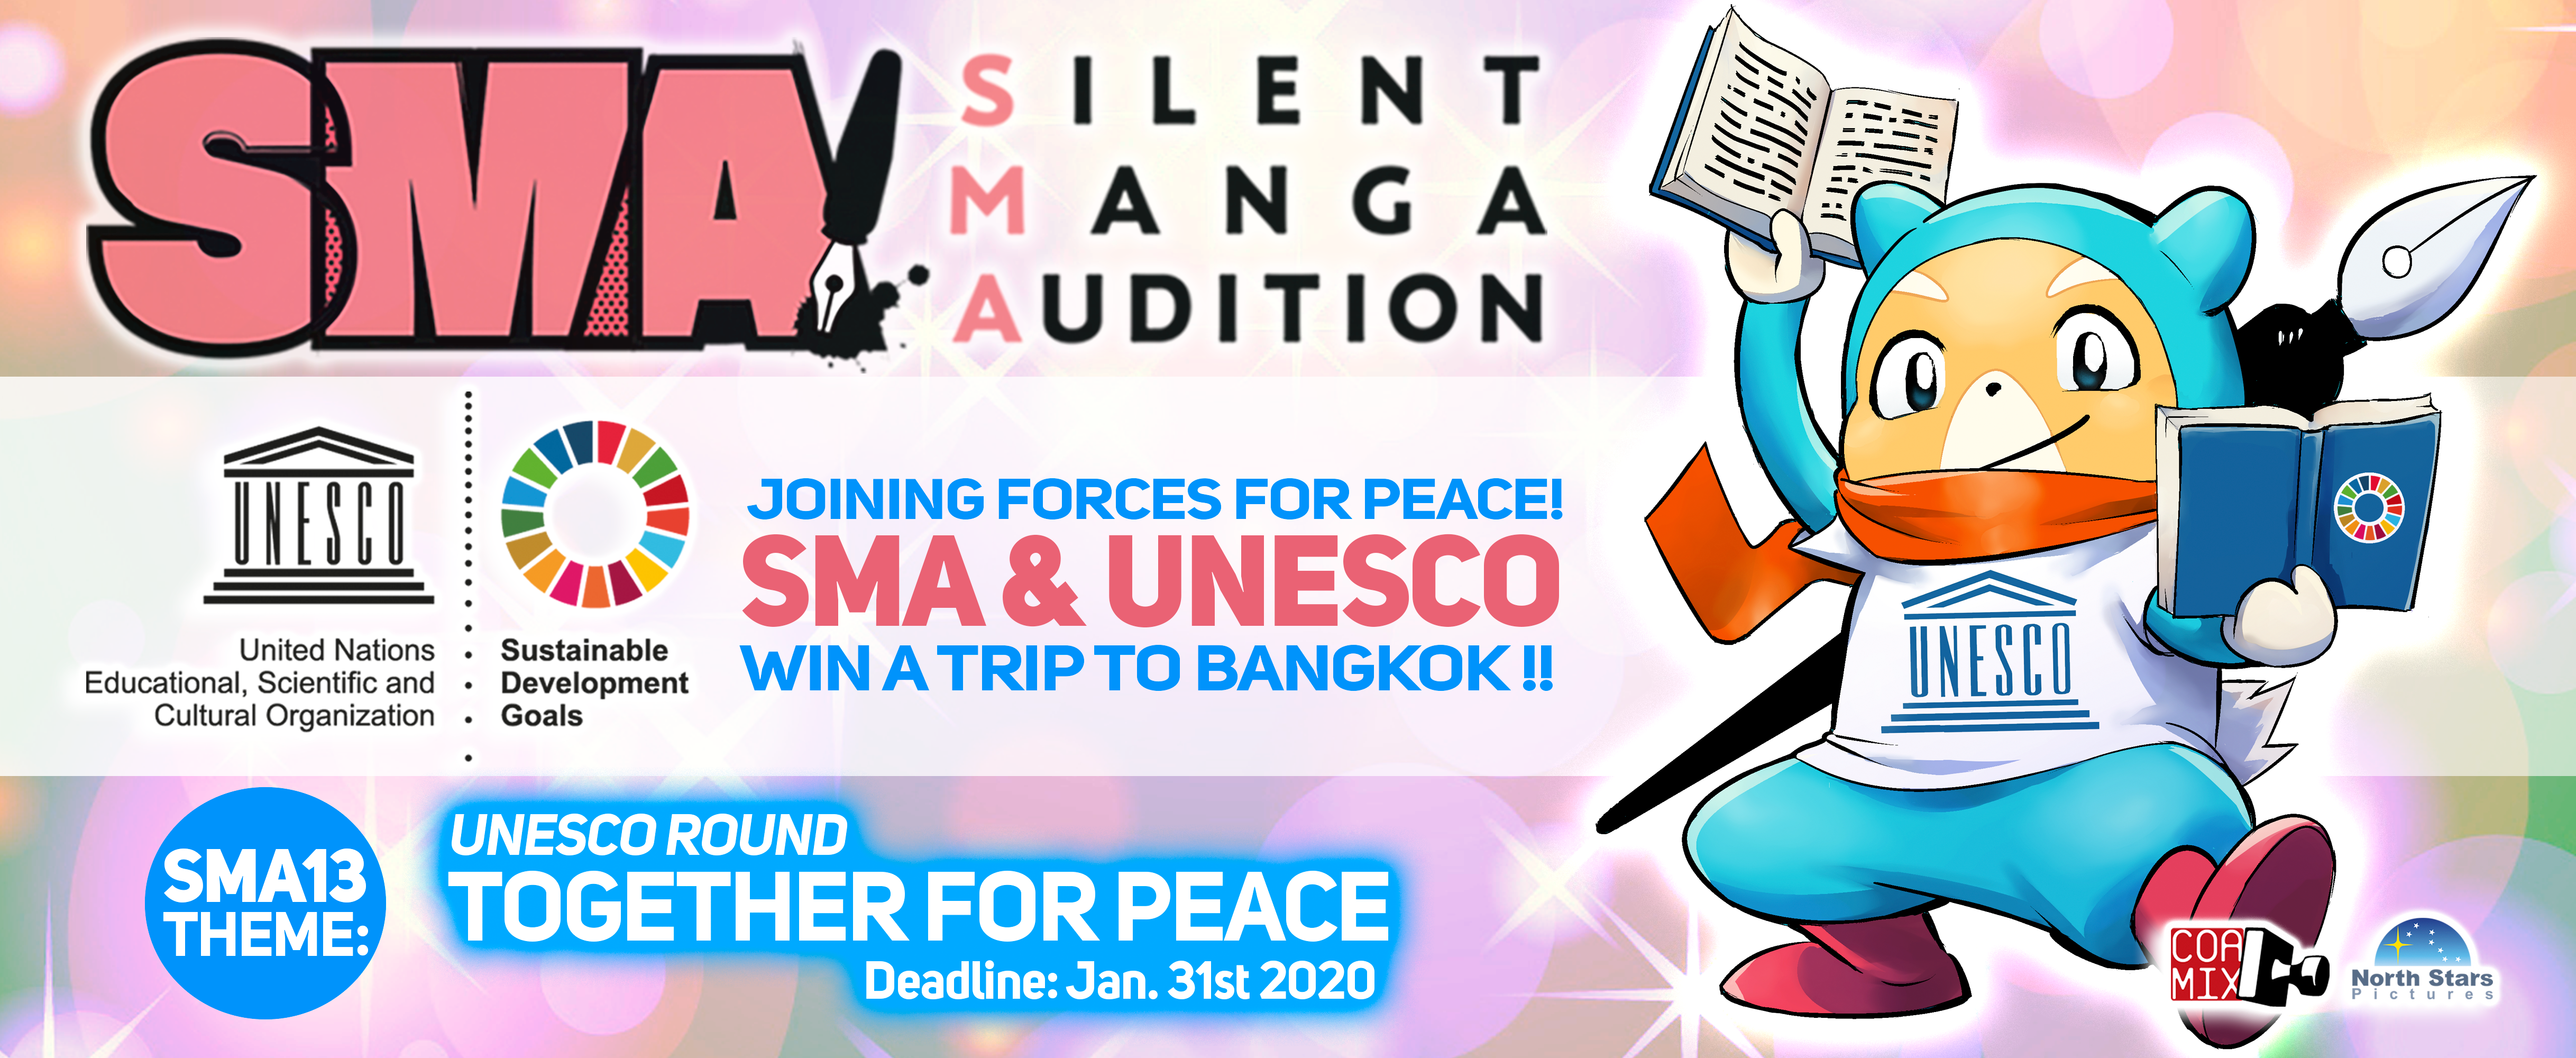 Celsys Sponsors the 13th Silent Manga Audition, “Together for Peace,”   Organized by Coamix in Collaboration with UNESCO